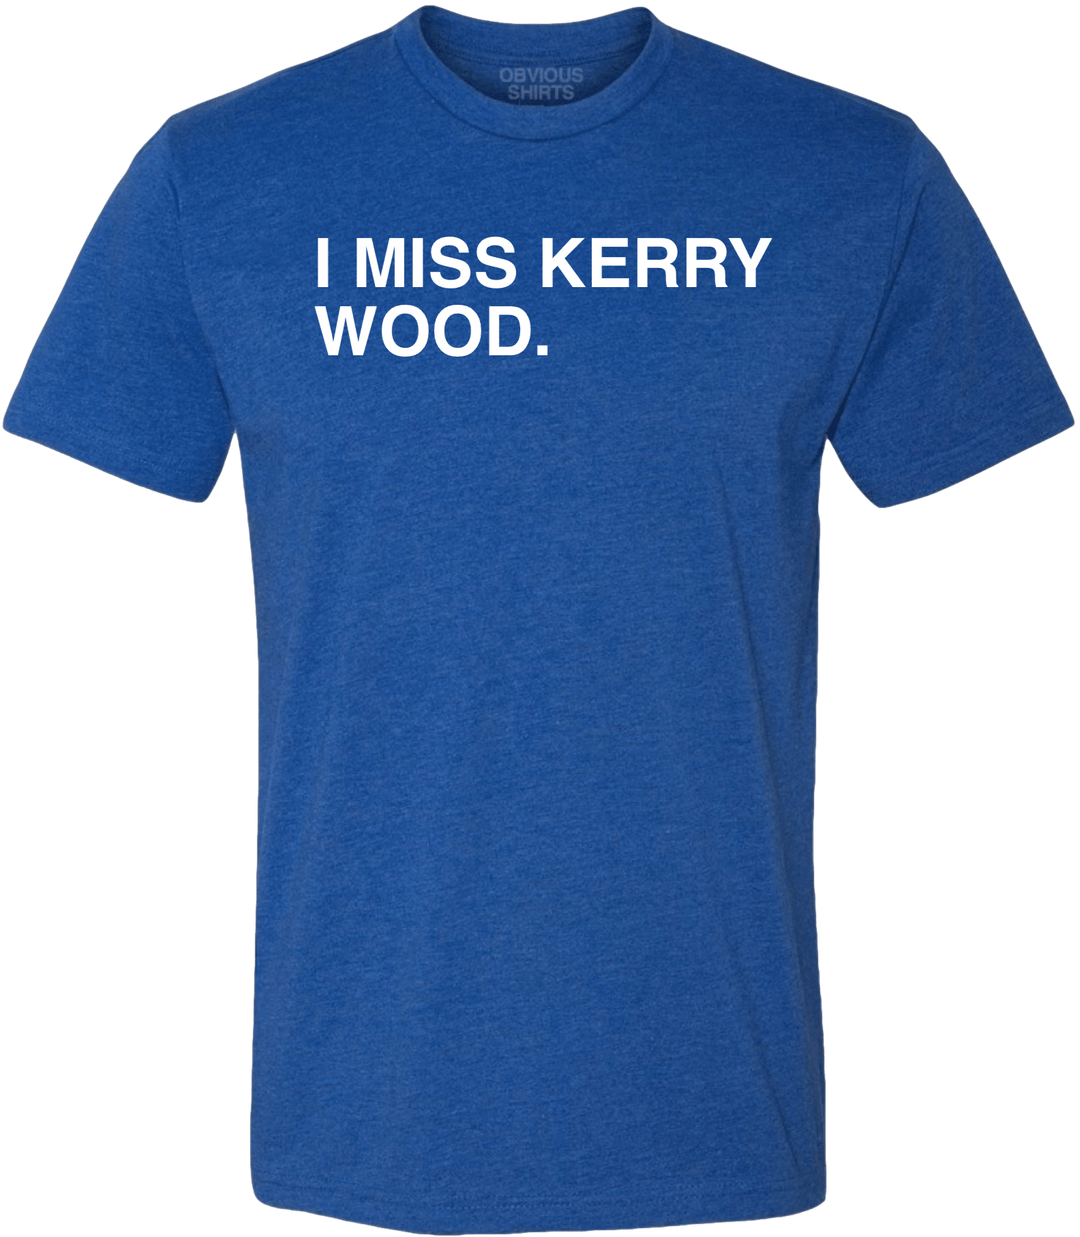 I MISS KERRY WOOD. - OBVIOUS SHIRTS